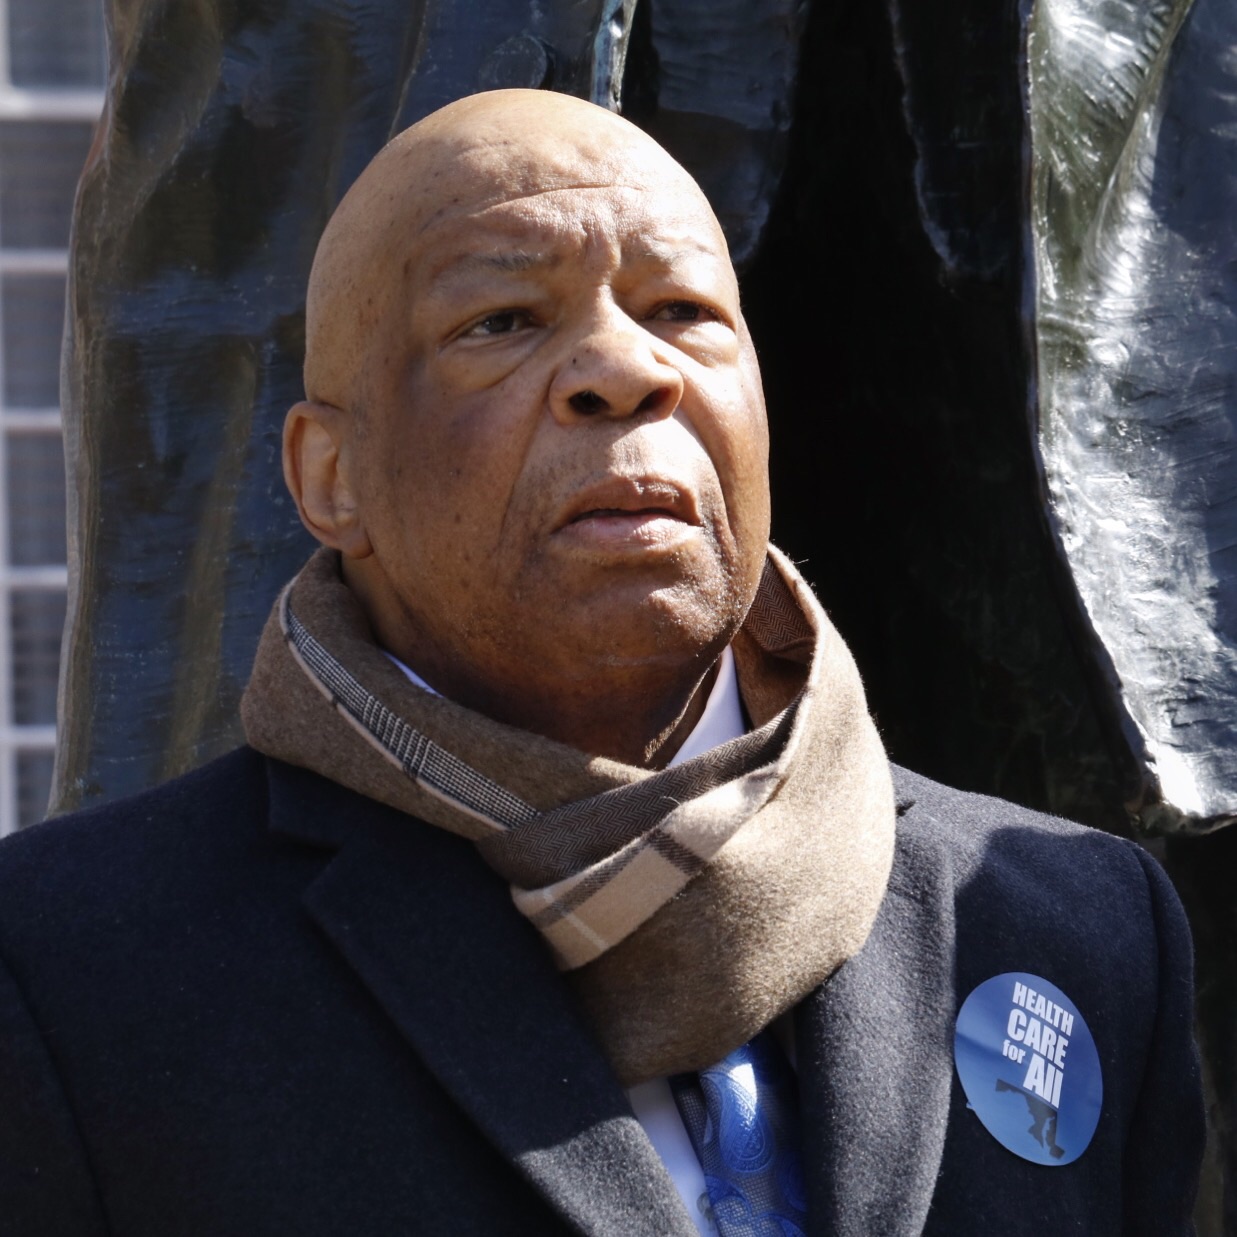 Rep. Elijah Cummings, D-Maryland, at a rally in front of the governor's mansion in Annapolis in 2017. (WTOP/Kate Ryan)